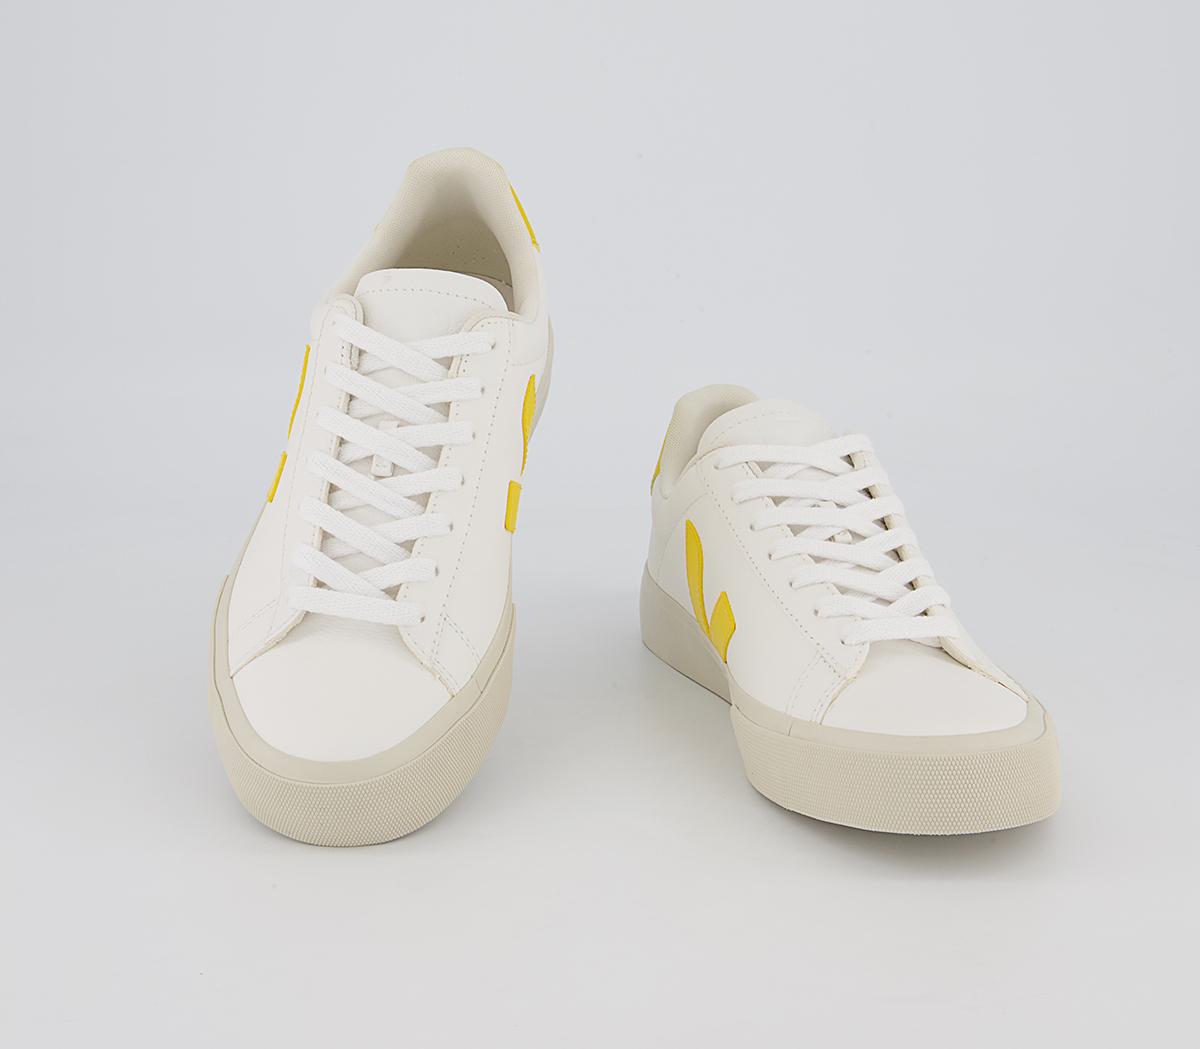 VEJA Campo Trainers White Tonic F - Women's Trainers